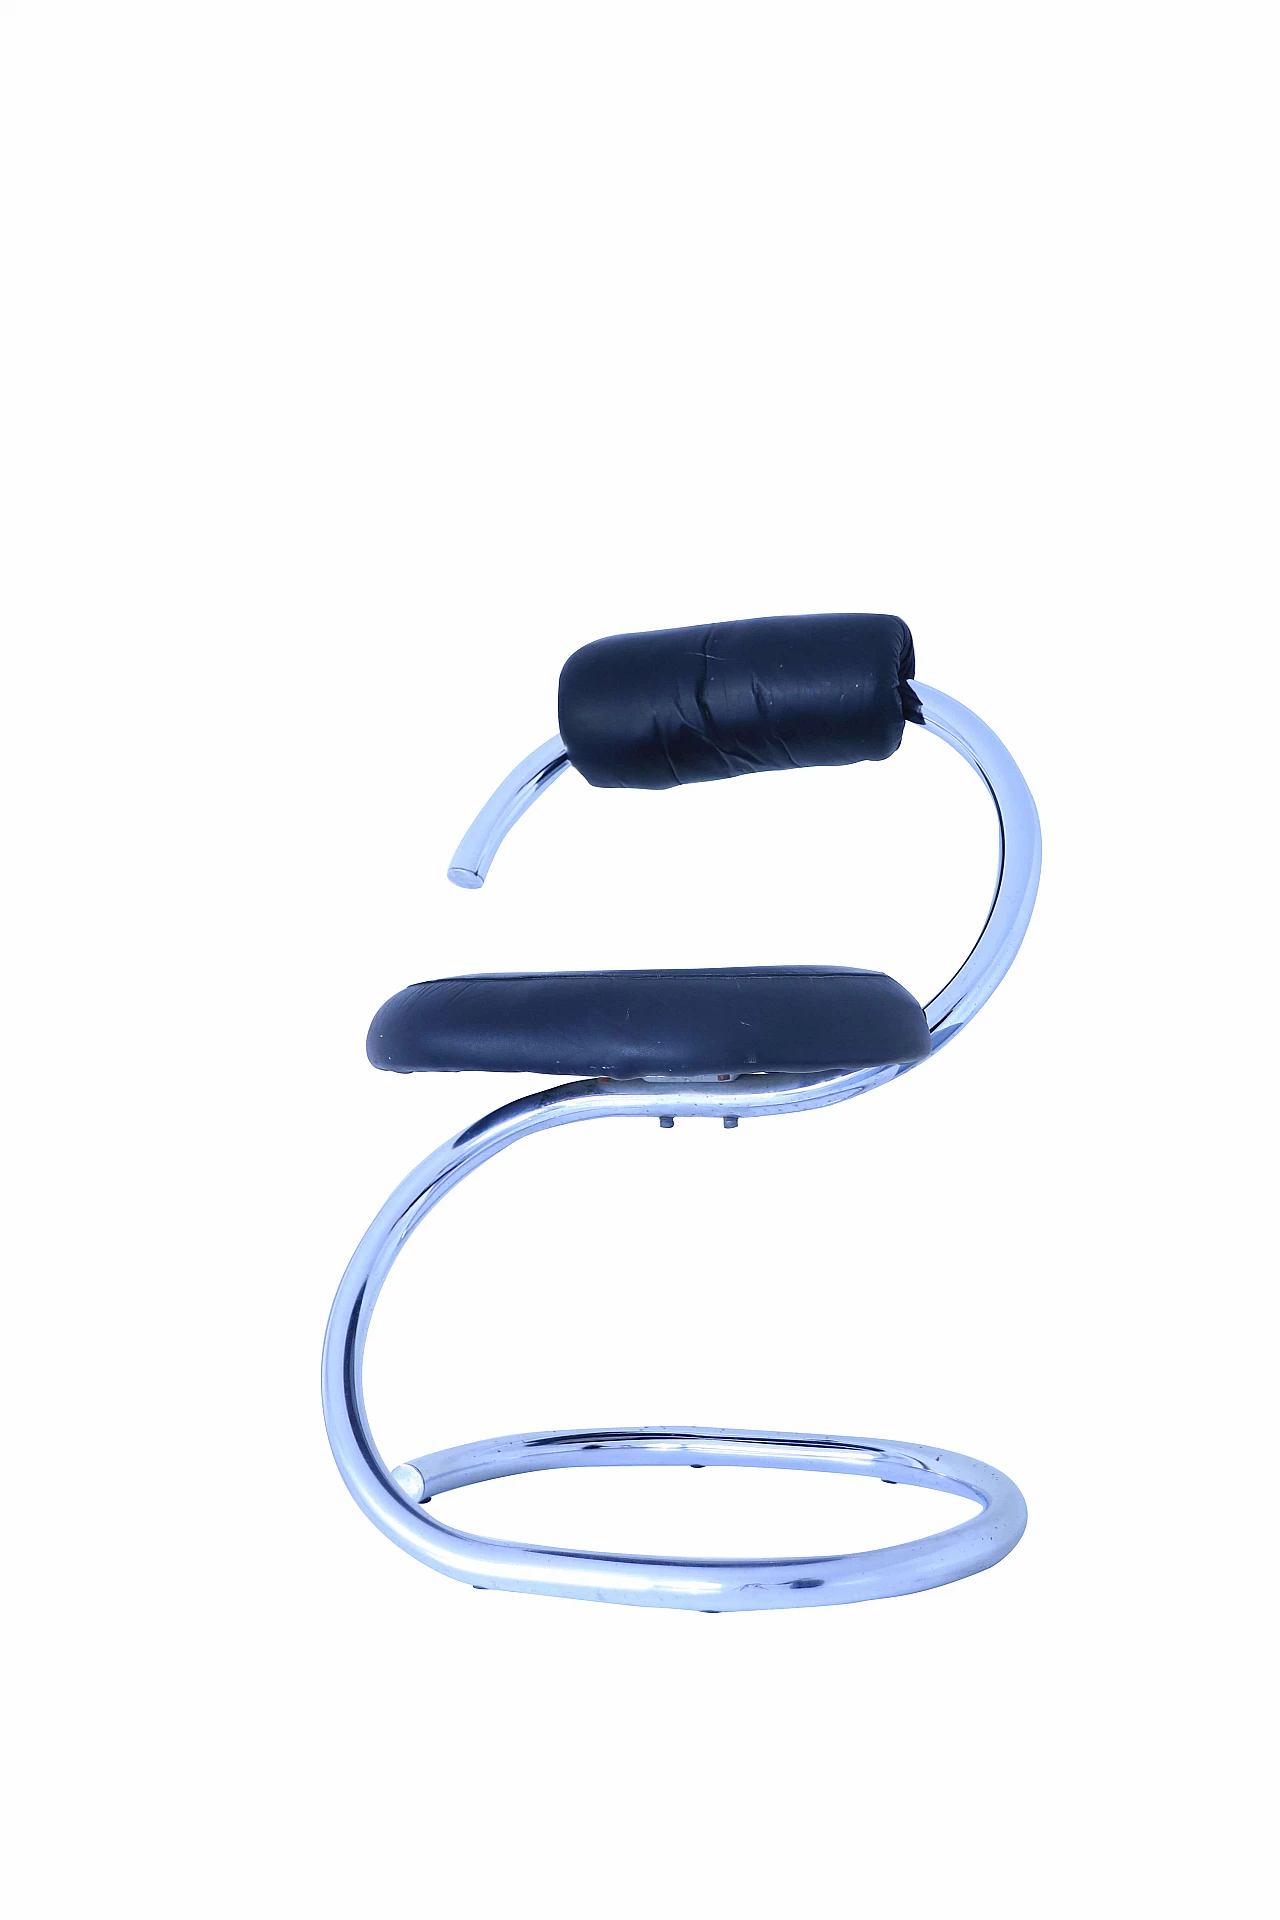 4 Cobra chairs by Giotto Stoppino 1115910